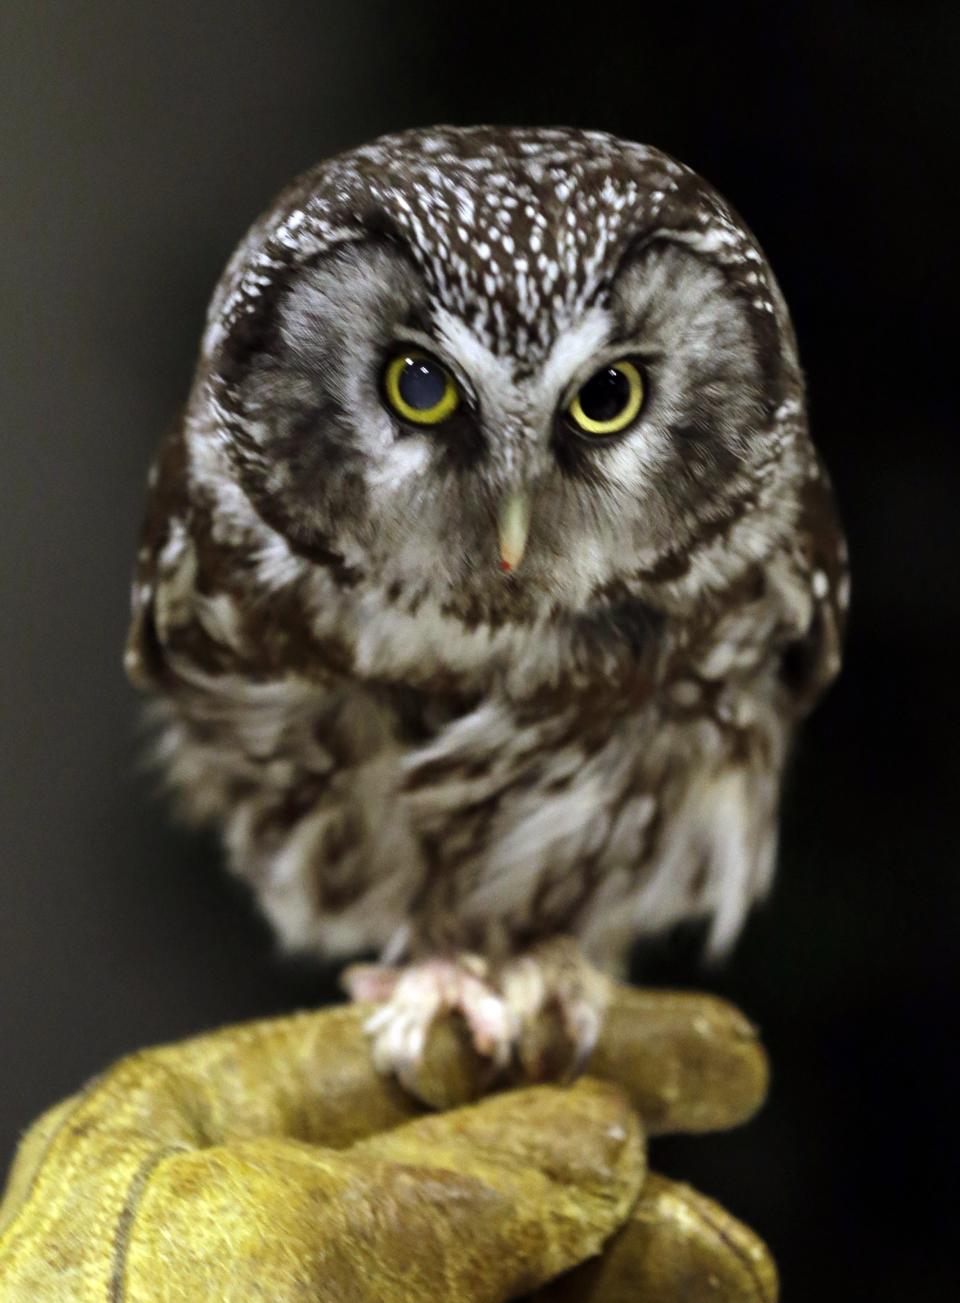 Boreas, an injured boreal owl, sits on a handlers hand, Wednesday, March 13, 2013, at the Raptor Center on the St. Paul campus of the University of Minnesota. The center listed about 30 owls as patients this week. It has been a tough winter for owls in some parts of North America. Some have headed south in search of food instead of staying in their northern territories. (AP Photo/Jim Mone)